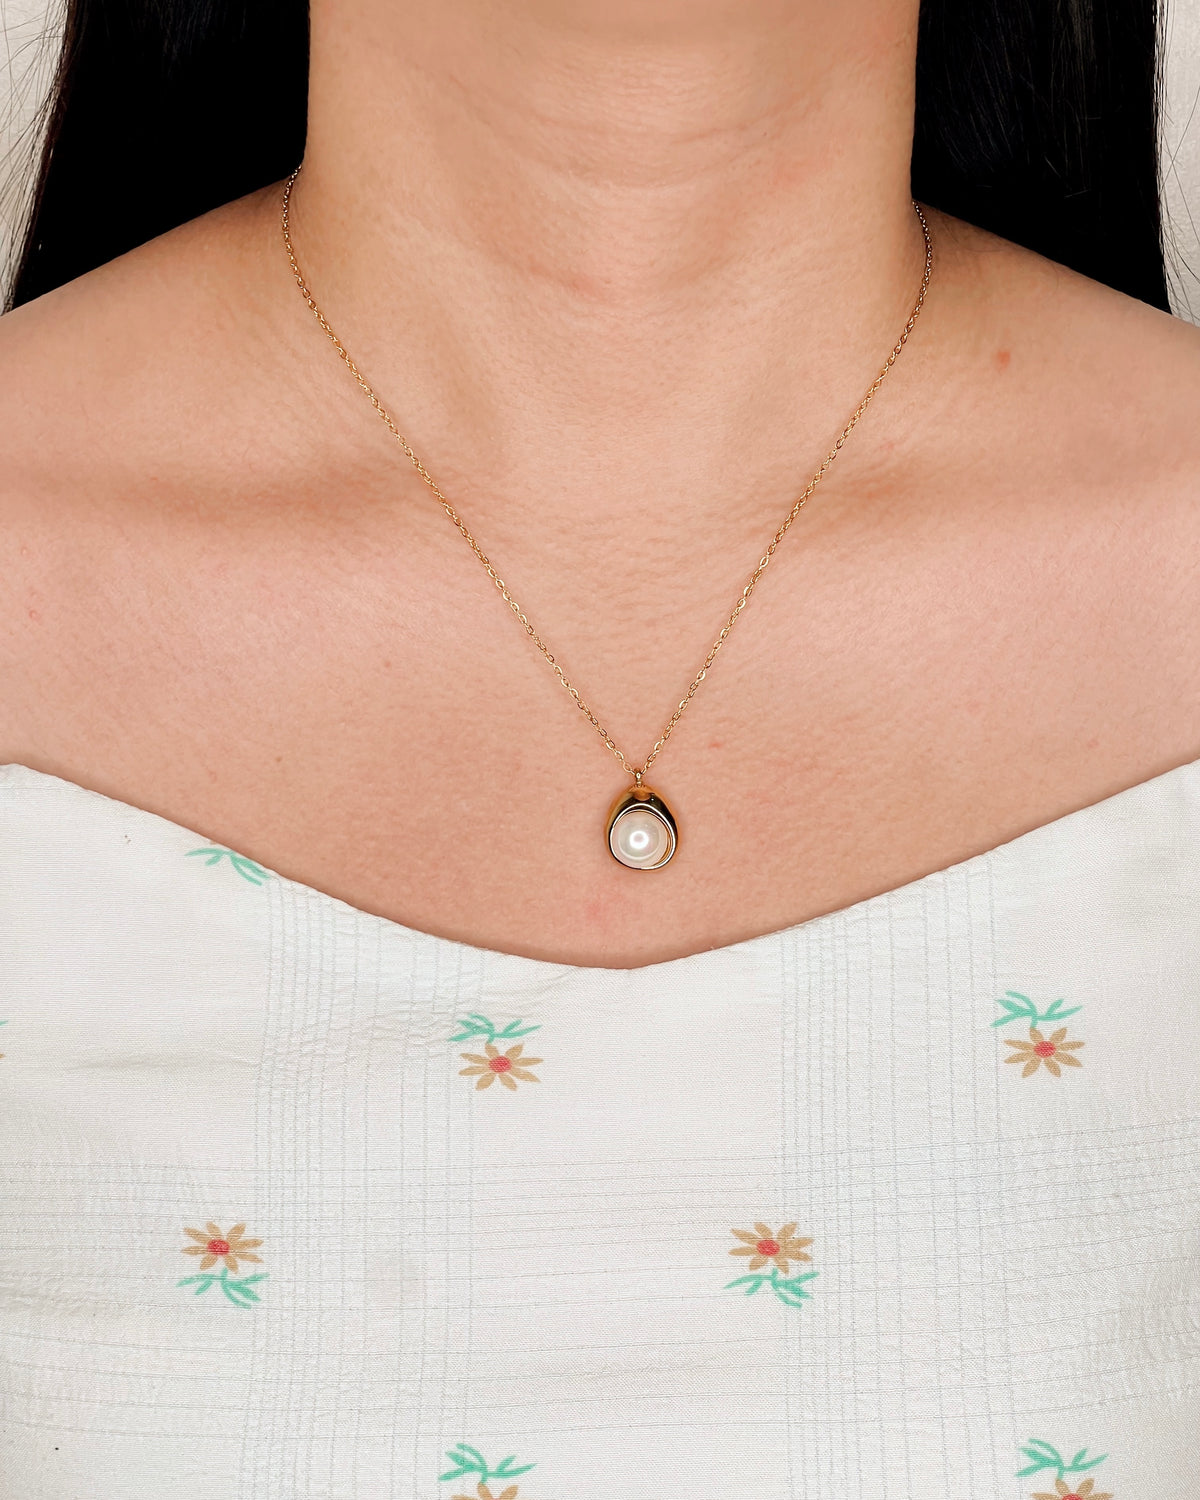 Juliet Shell Pearl Dome Inlaid Pendant Link Chain Gold Necklace